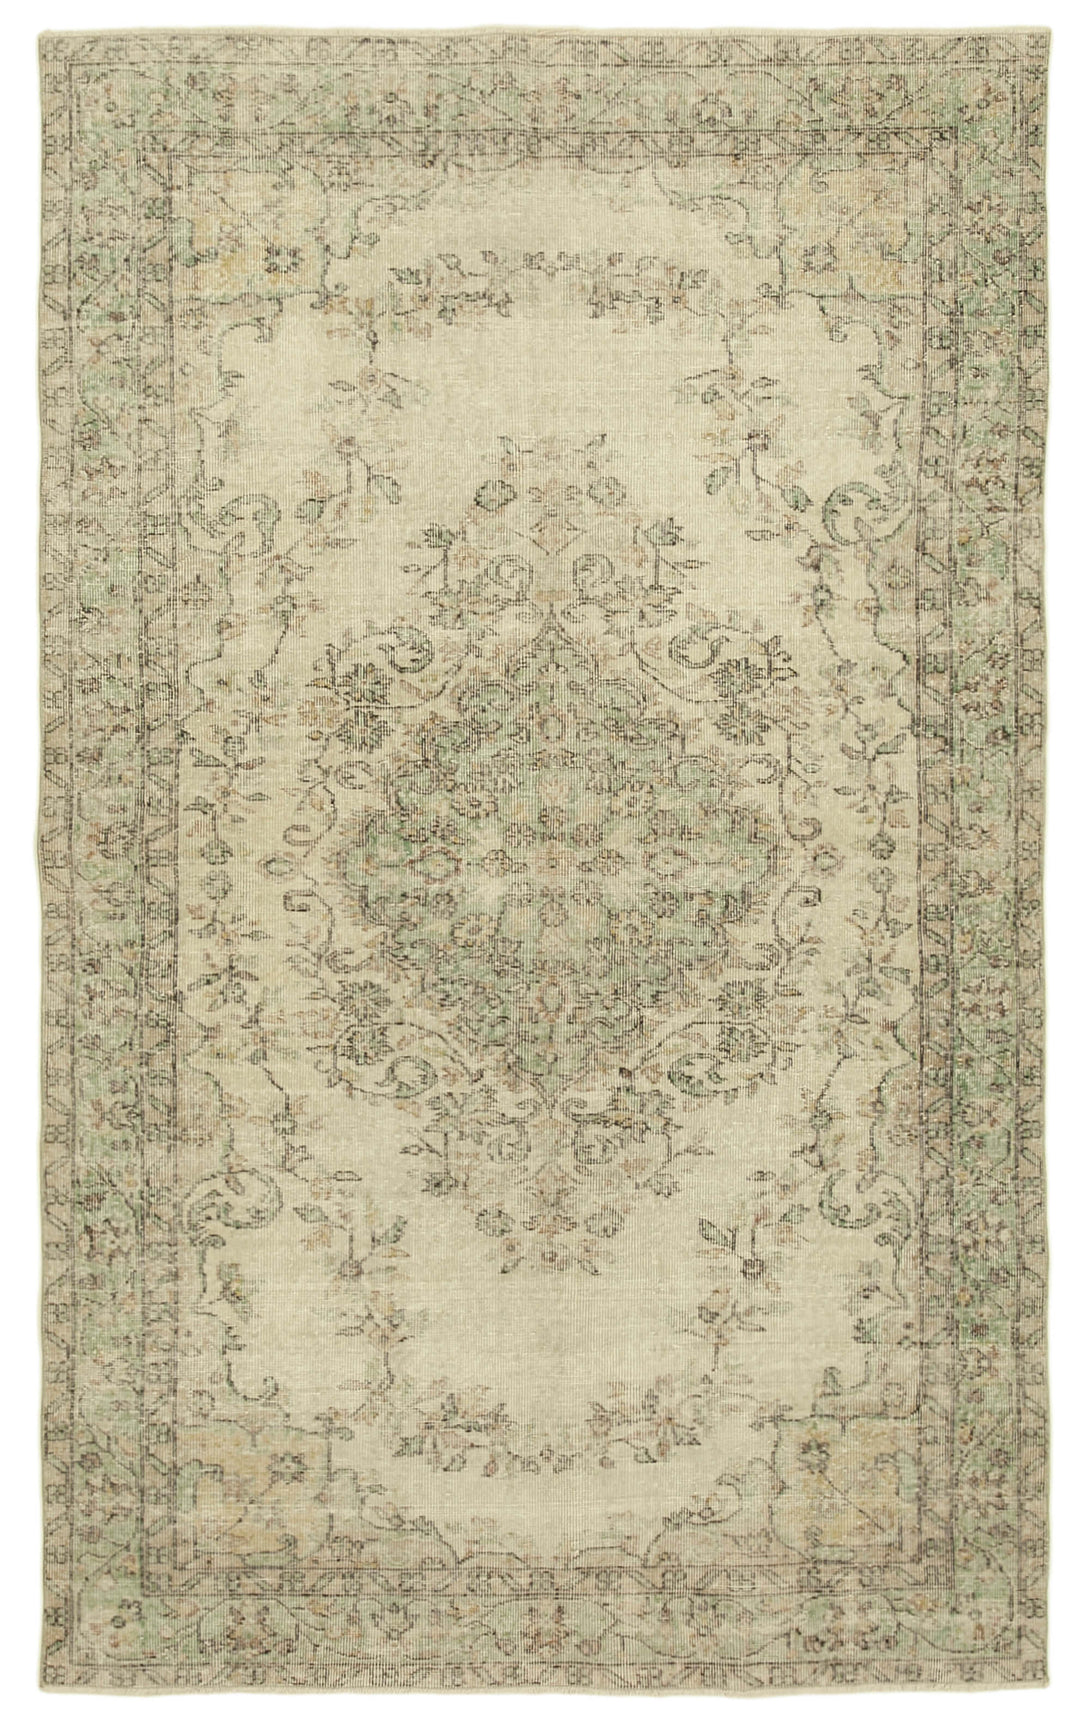 Handmade White Wash Area Rug > Design# OL-AC-38998 > Size: 5'-7" x 9'-2", Carpet Culture Rugs, Handmade Rugs, NYC Rugs, New Rugs, Shop Rugs, Rug Store, Outlet Rugs, SoHo Rugs, Rugs in USA